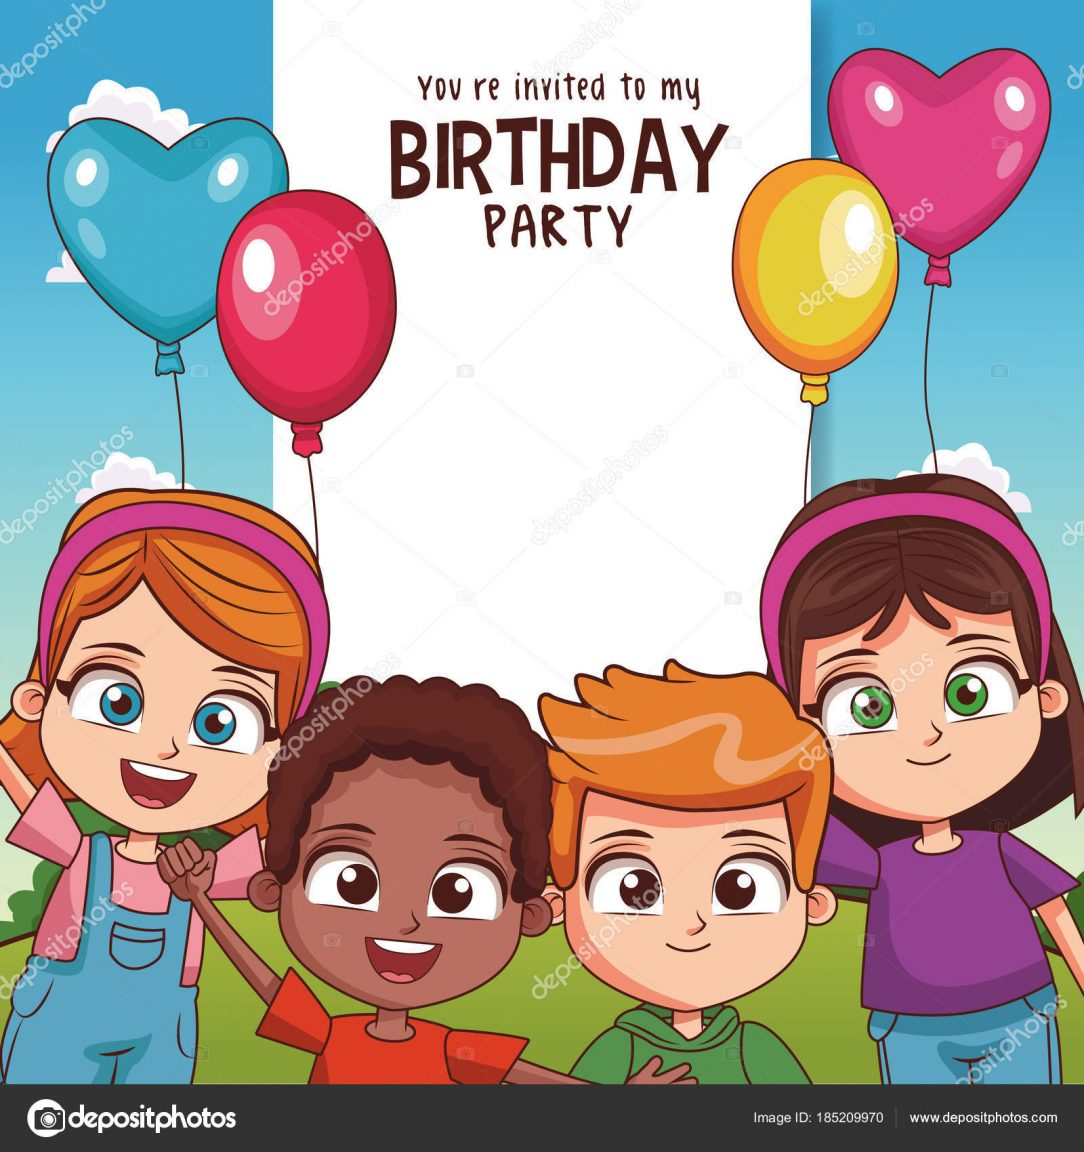 Kids Birthday Card Ideas Kids Birthday Party Food Ideas Locations Great Card Parties